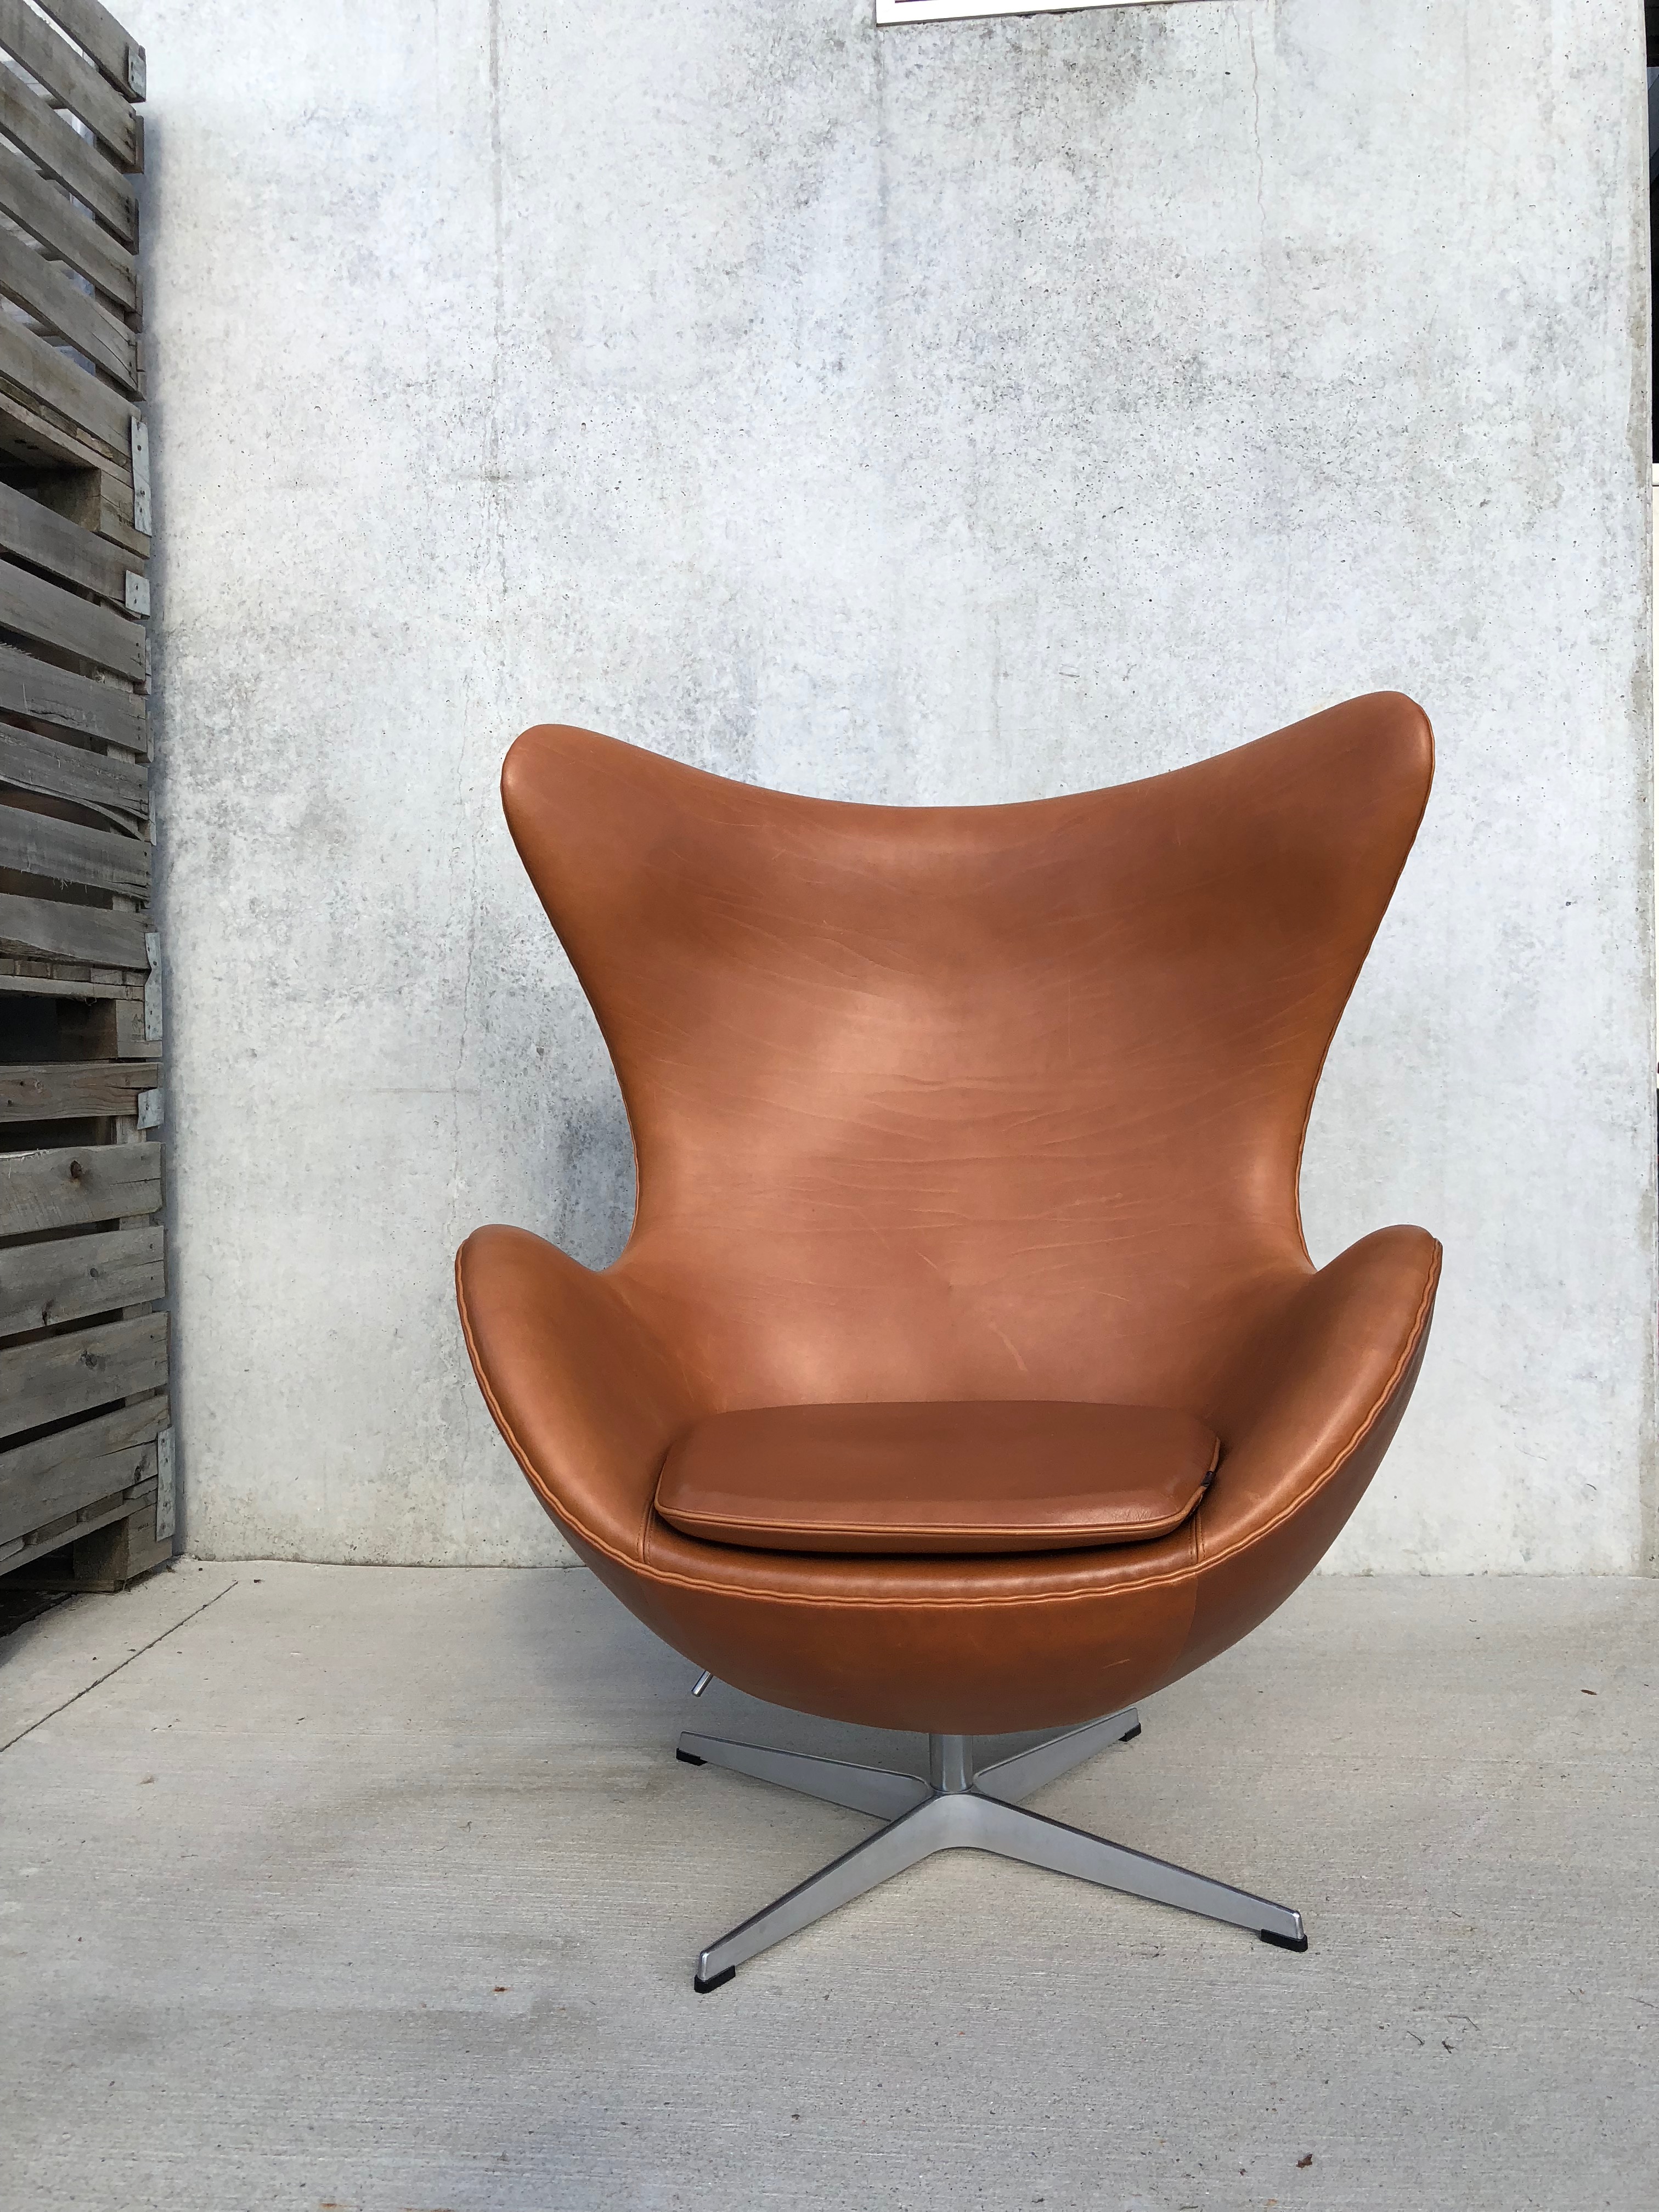 Verkocht, Sorry! EGG CHAIR – REDESIGNS.BE